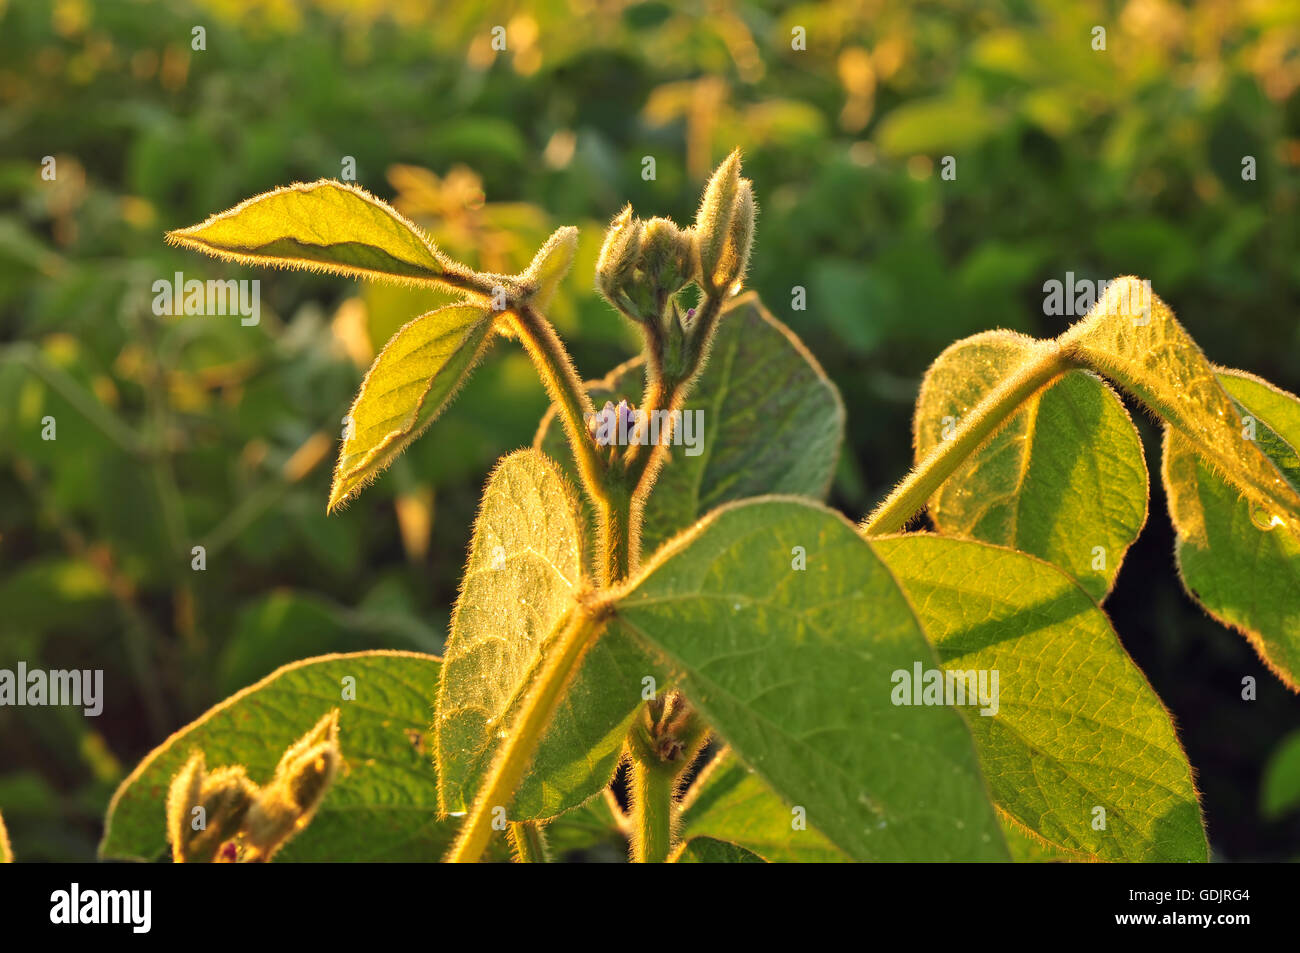 Close up photo of a soybean plant Stock Photo